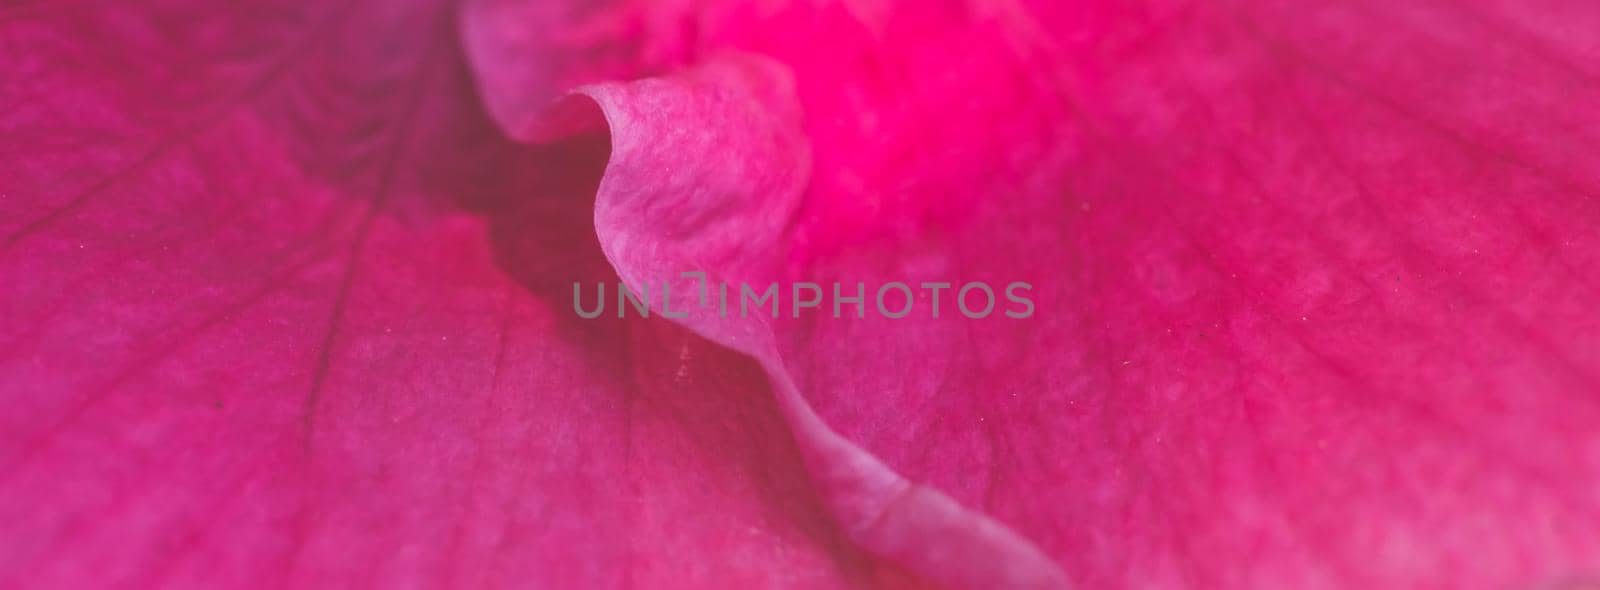 BANNER Macro abstract real beautiful nature cute background. Bright pink purple gentle soft petals bloom tropical flower plant blossom. Floral botanical design decor. Greeting happy summer sun card by nandrey85